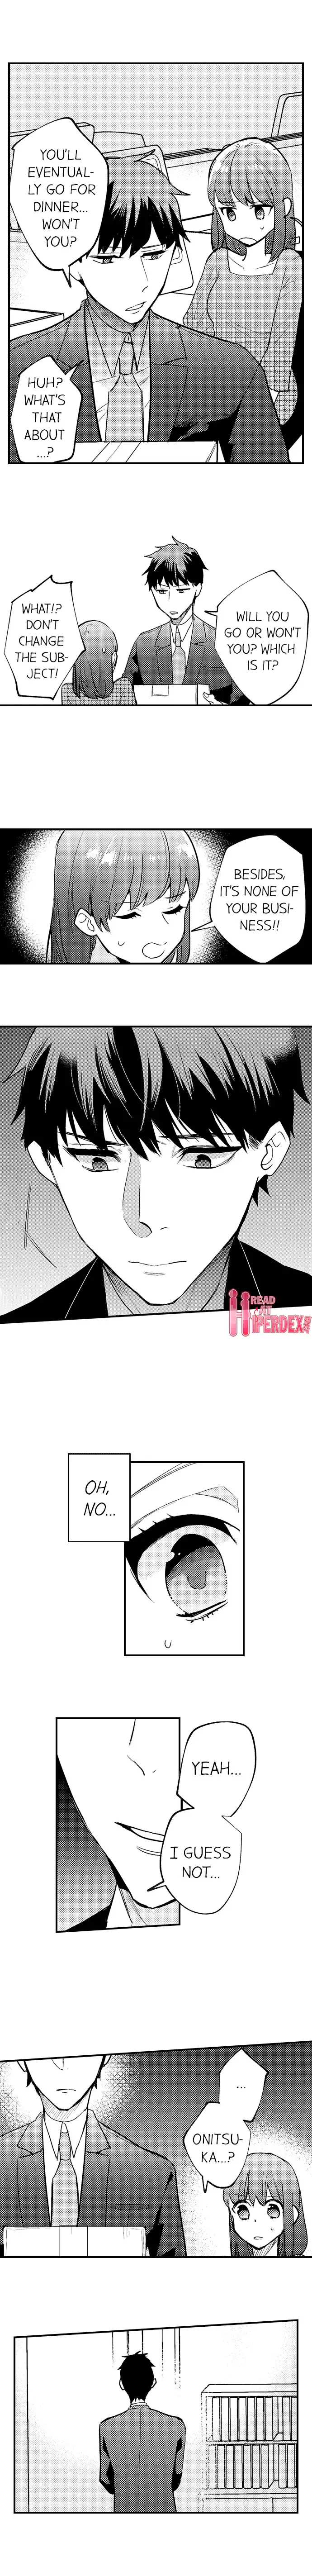 3 Hours + Love Hotel = You’re Mine - Chapter 10 Page 6